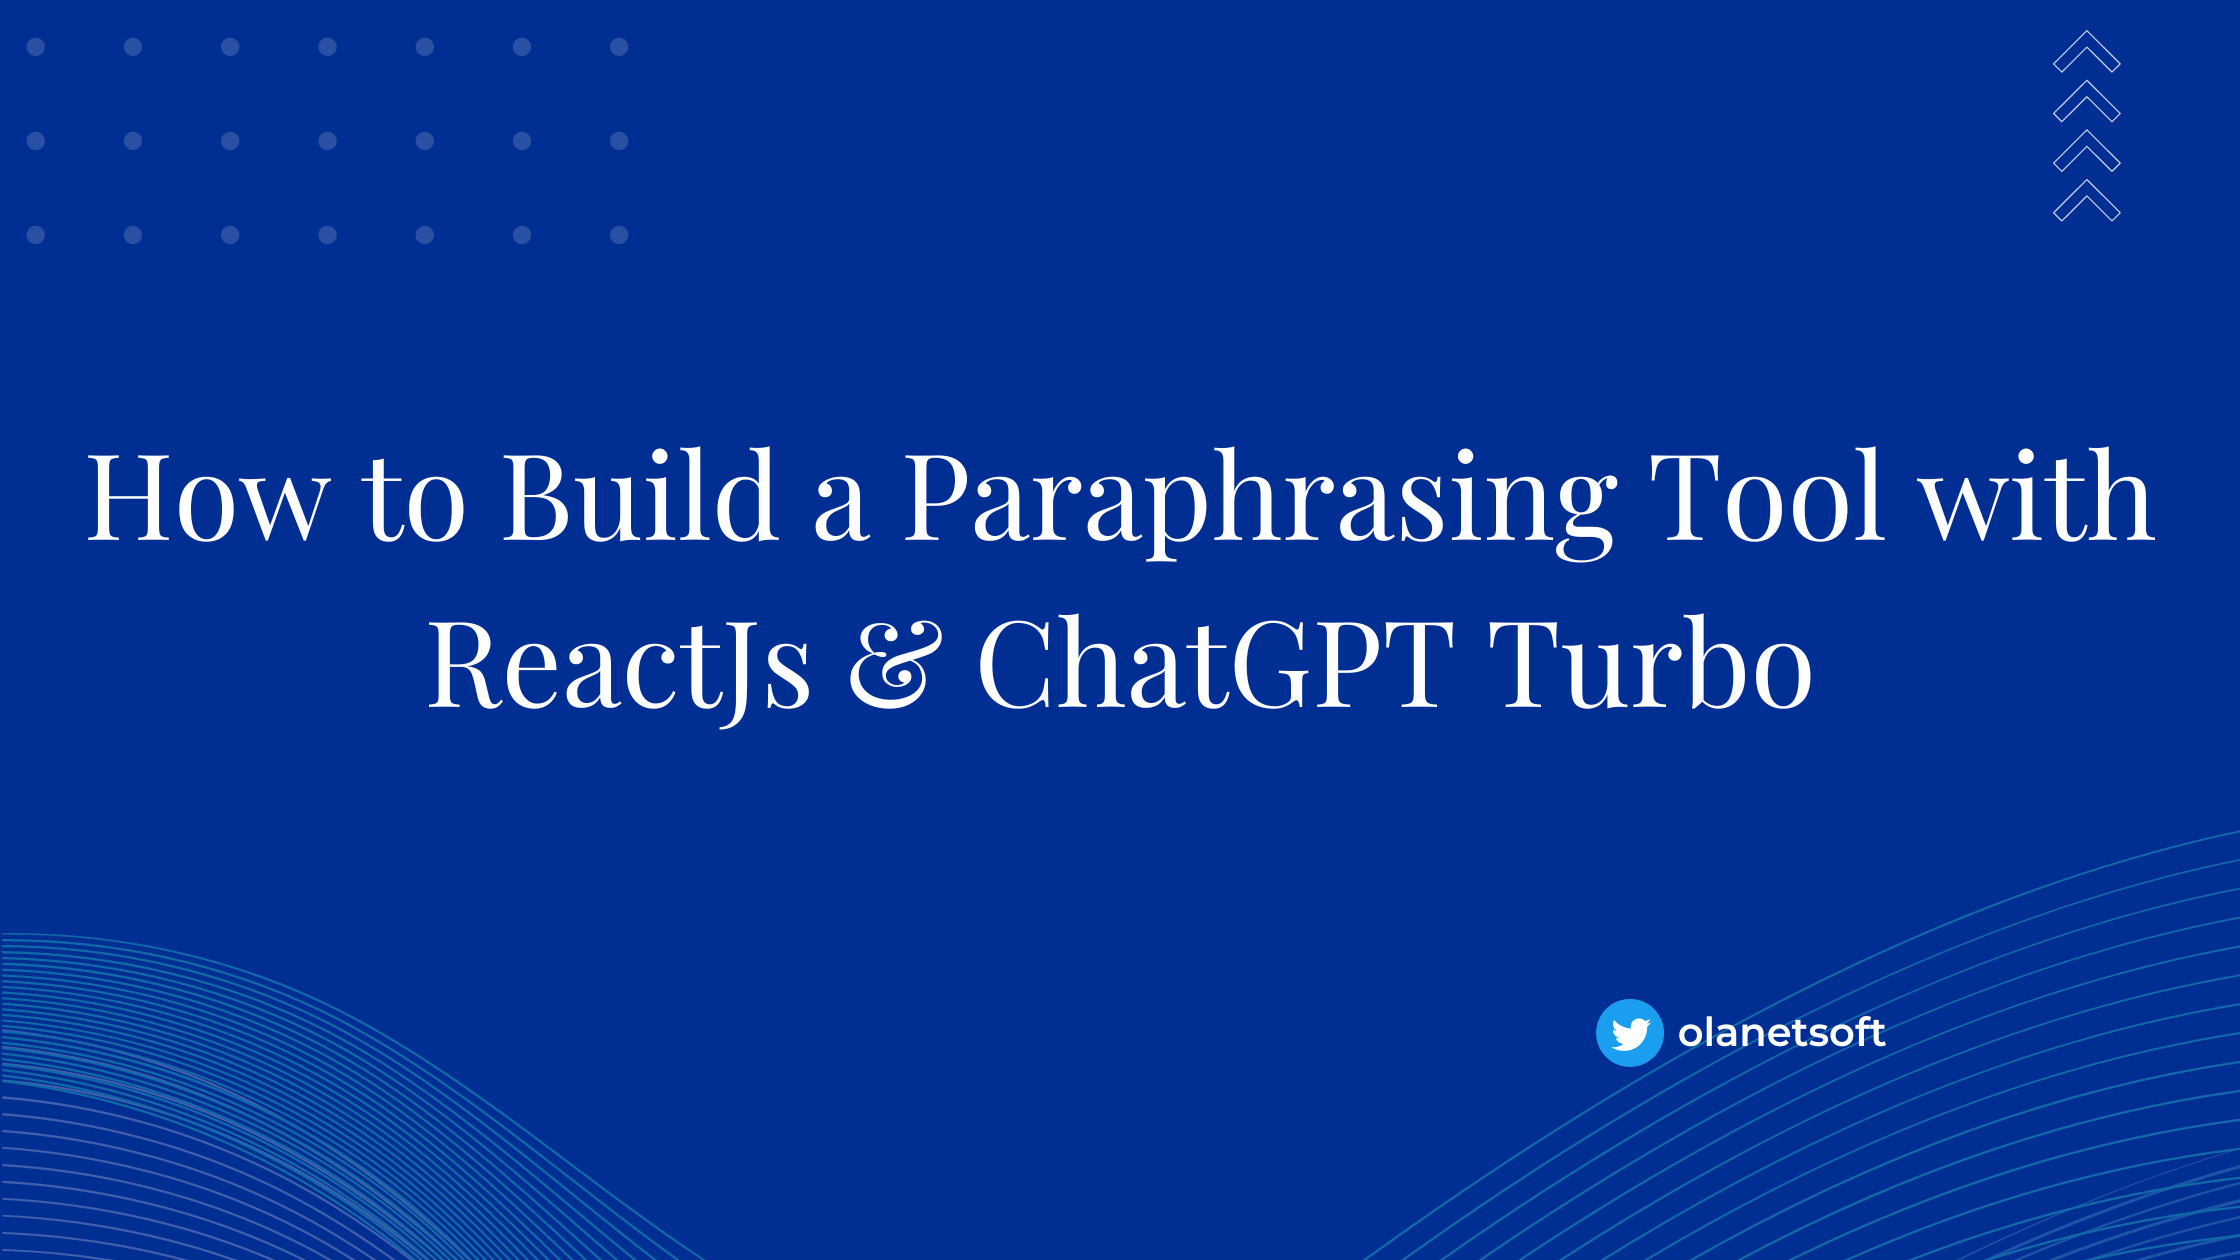 How to Build a Paraphrasing Tool with ReactJs & ChatGPT Turbo